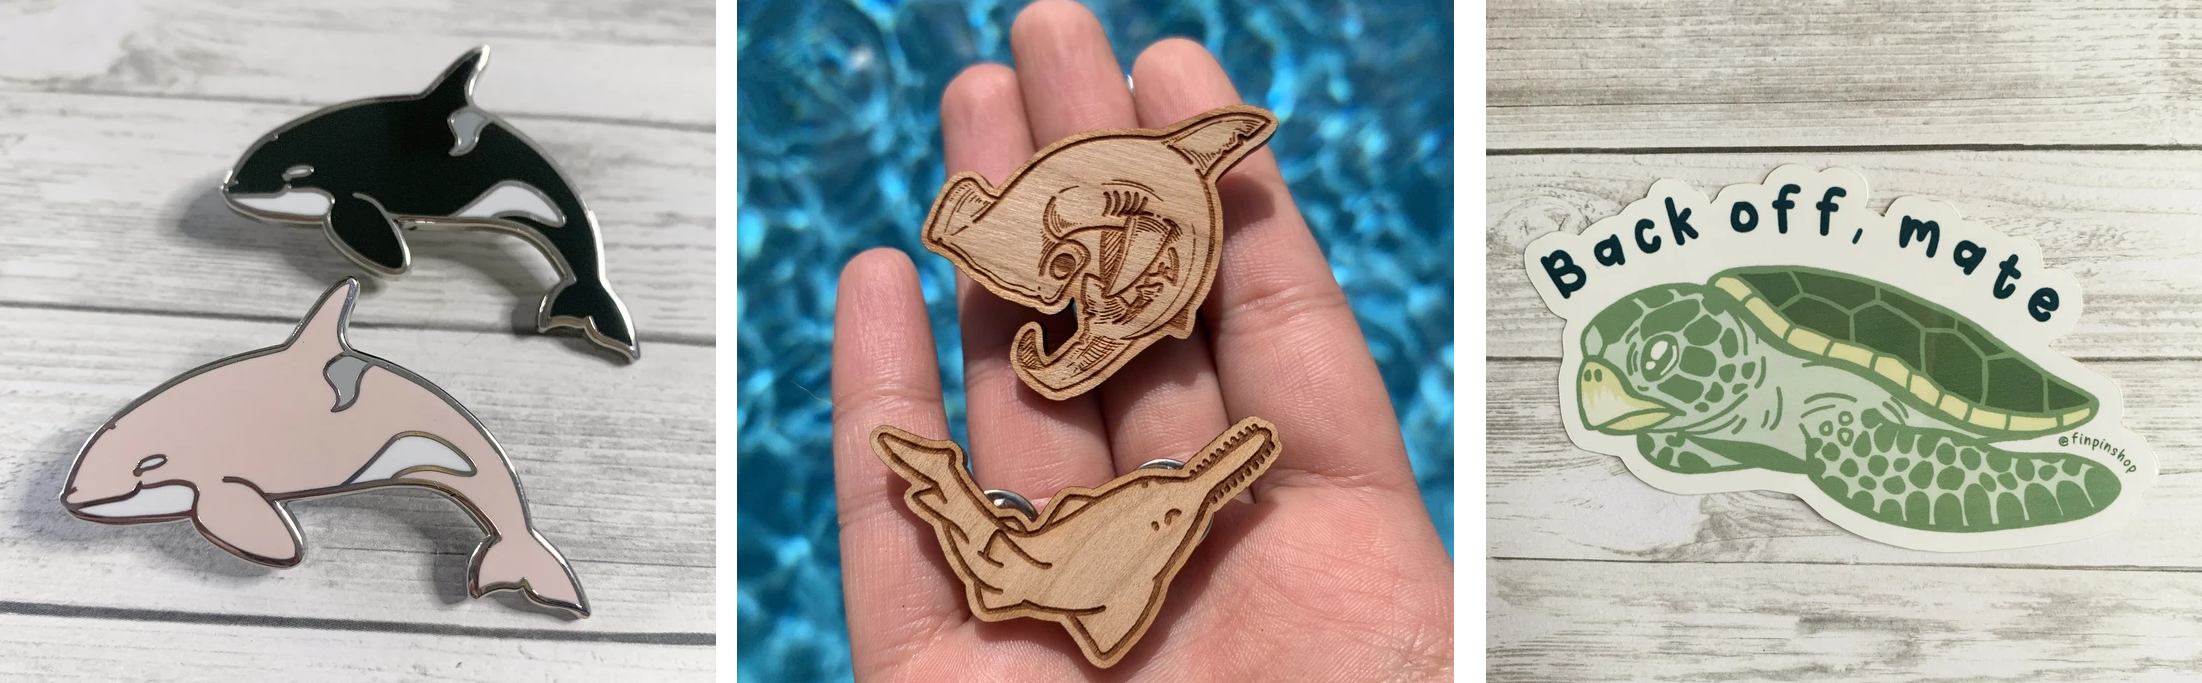 orca and shark pins, a turtle sticker